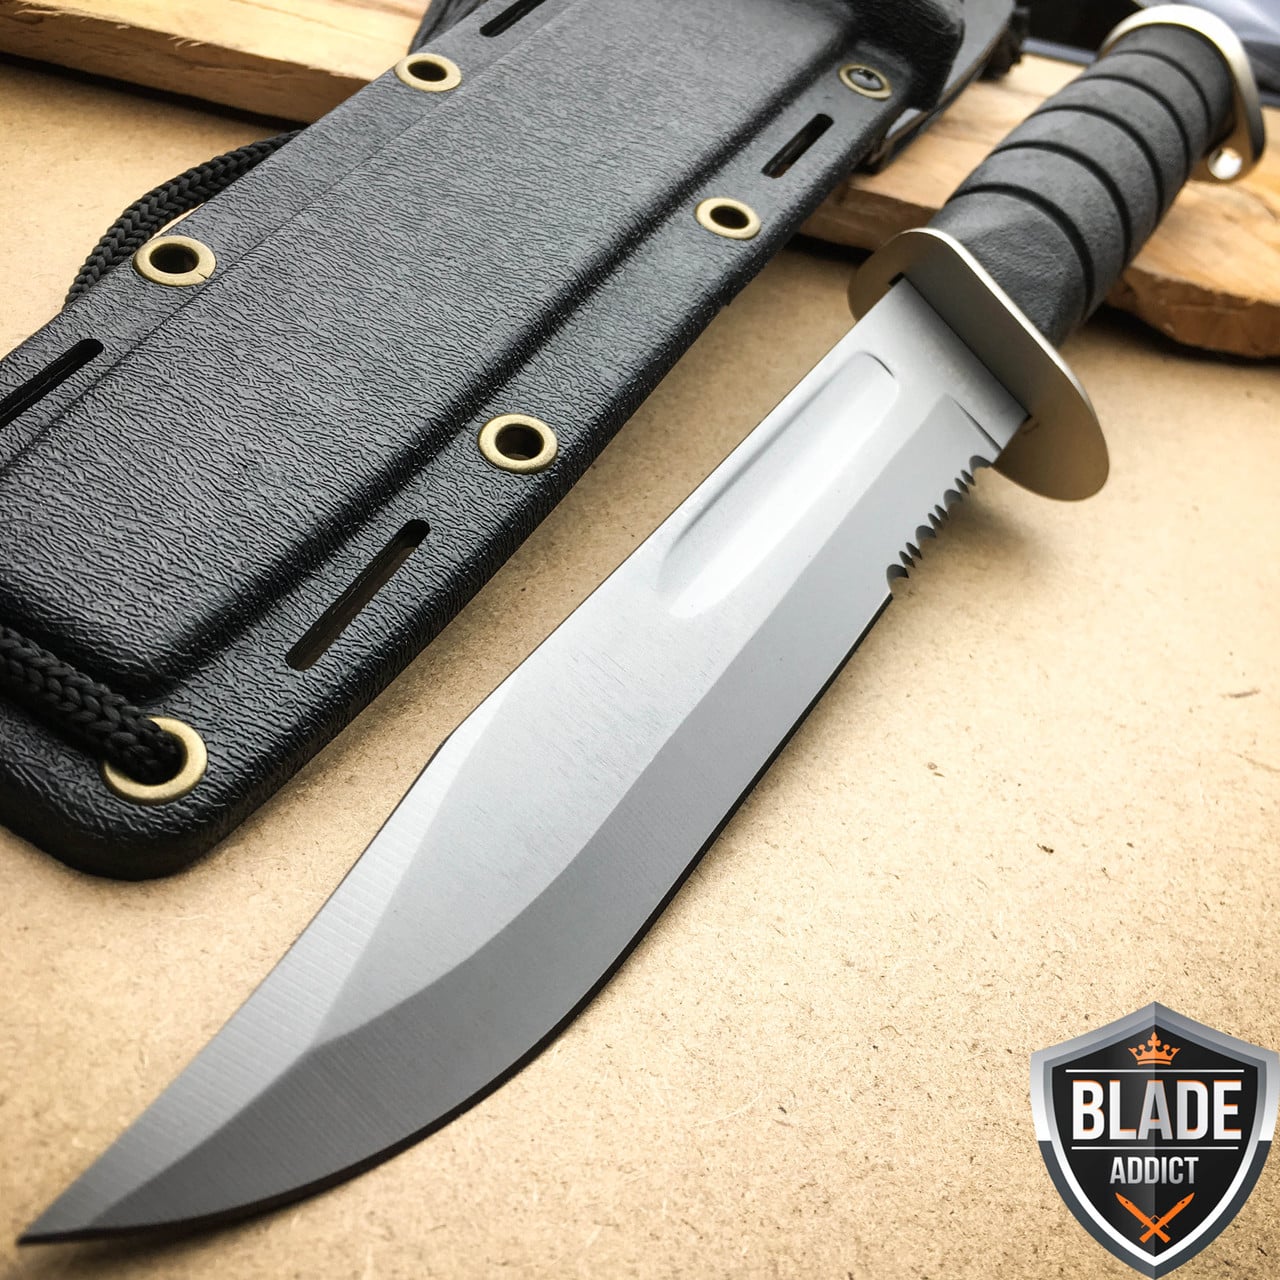 12″ Marine Hunting Tactical Military Combat Survival Knife Fixed Blade Camping